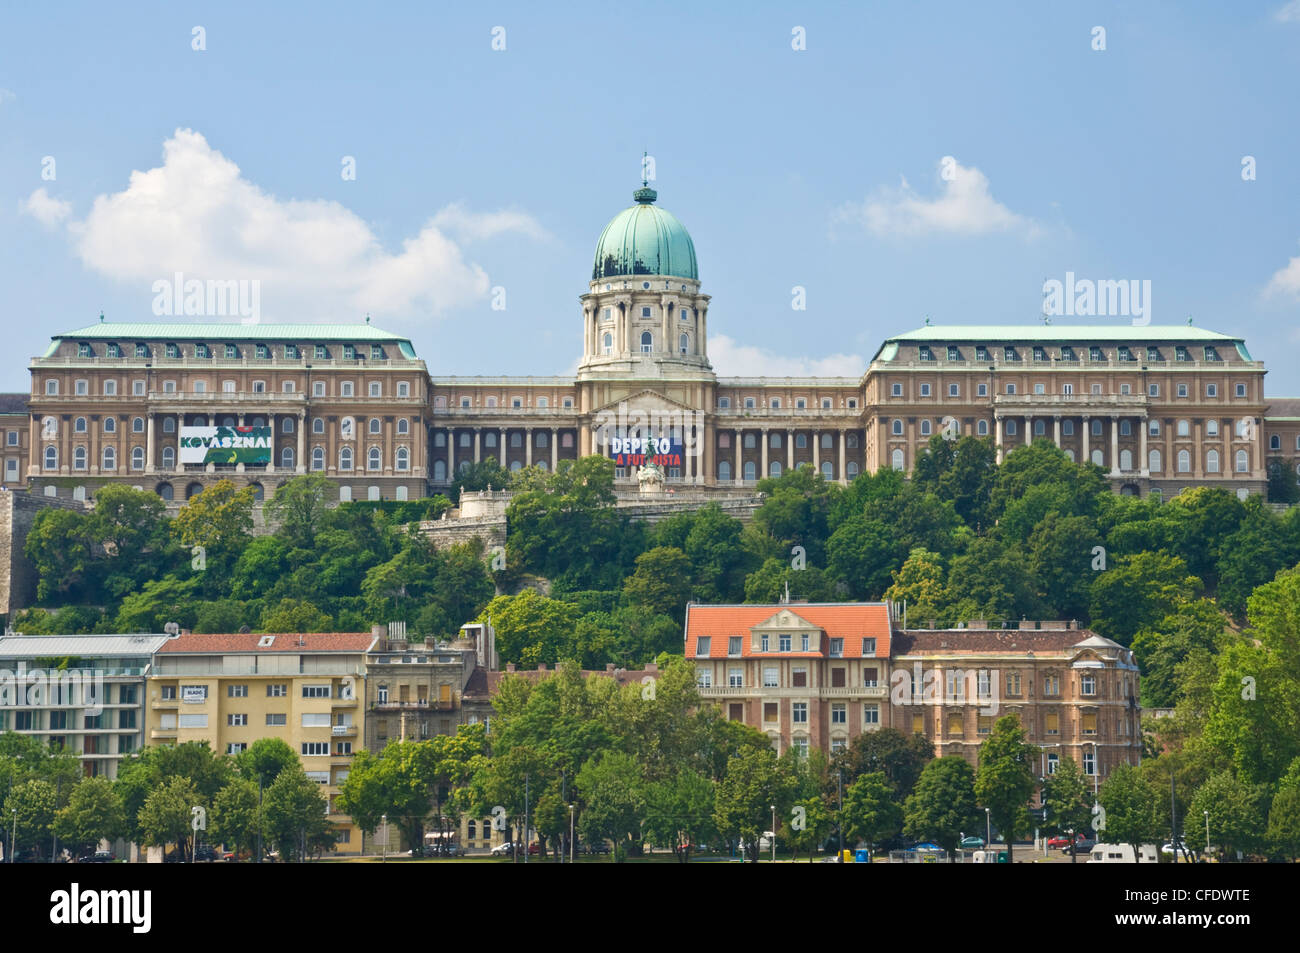 Hungarian National Gallery, part of the Royal Palace, Buda castle, Castle district, Budapest, Hungary, Europe Stock Photo